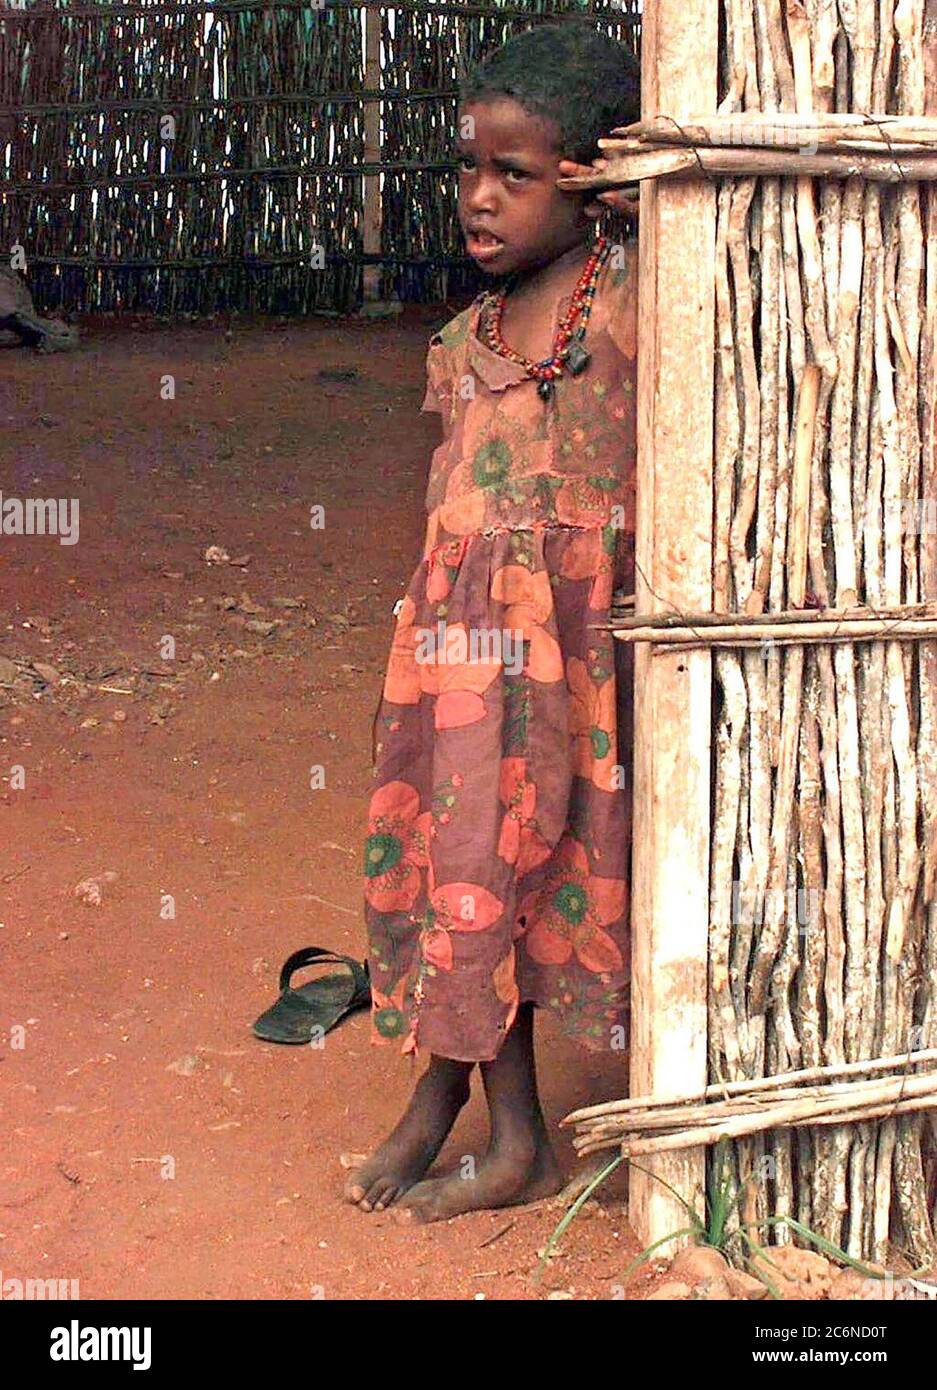 1992 - Straight on, medium close-up of a Somali girl, approximately six or seven years old.  She wears a flowered dress and leans against the entrance to a bamboo hut with a dirt floor. Stock Photo